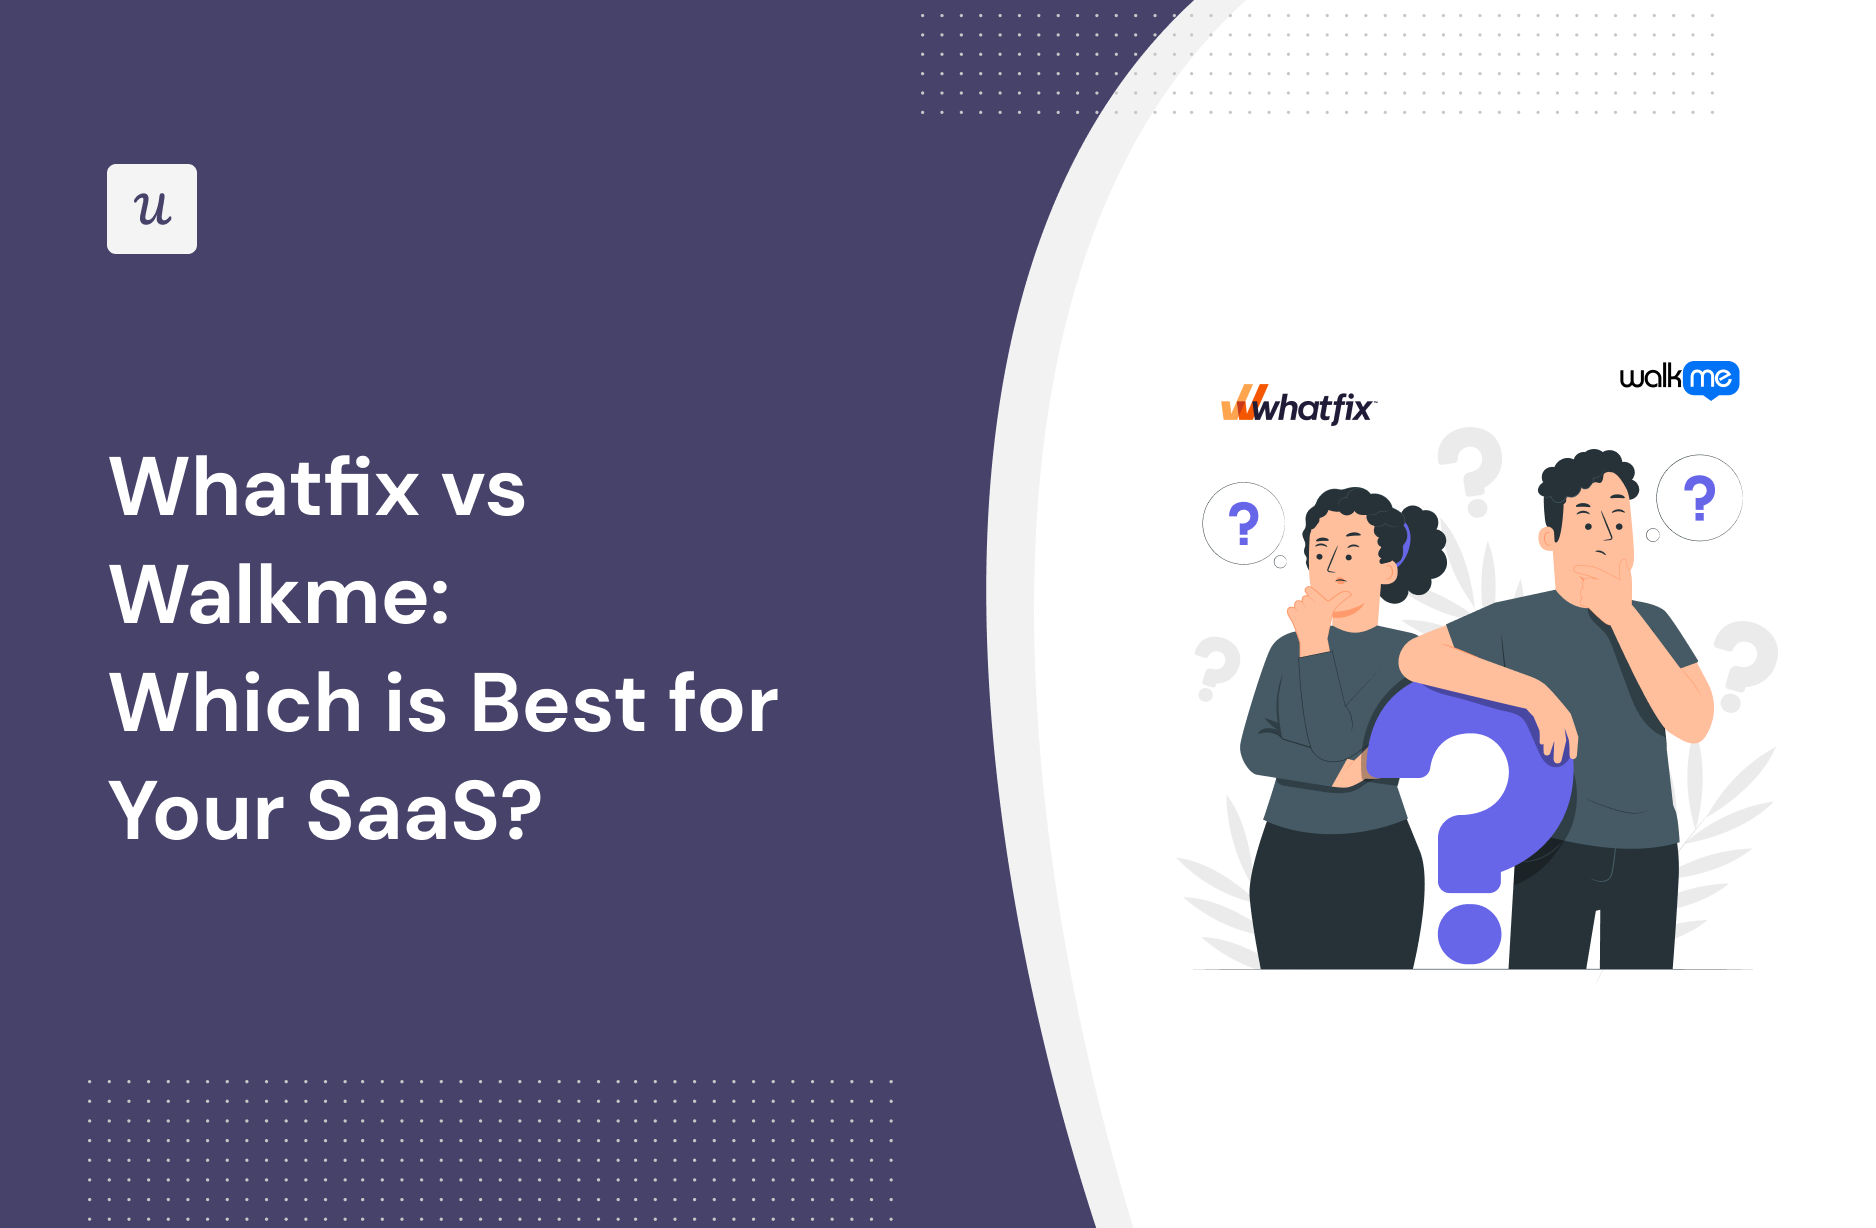 Whatfix vs Walkme: Which is Best for Your SaaS?